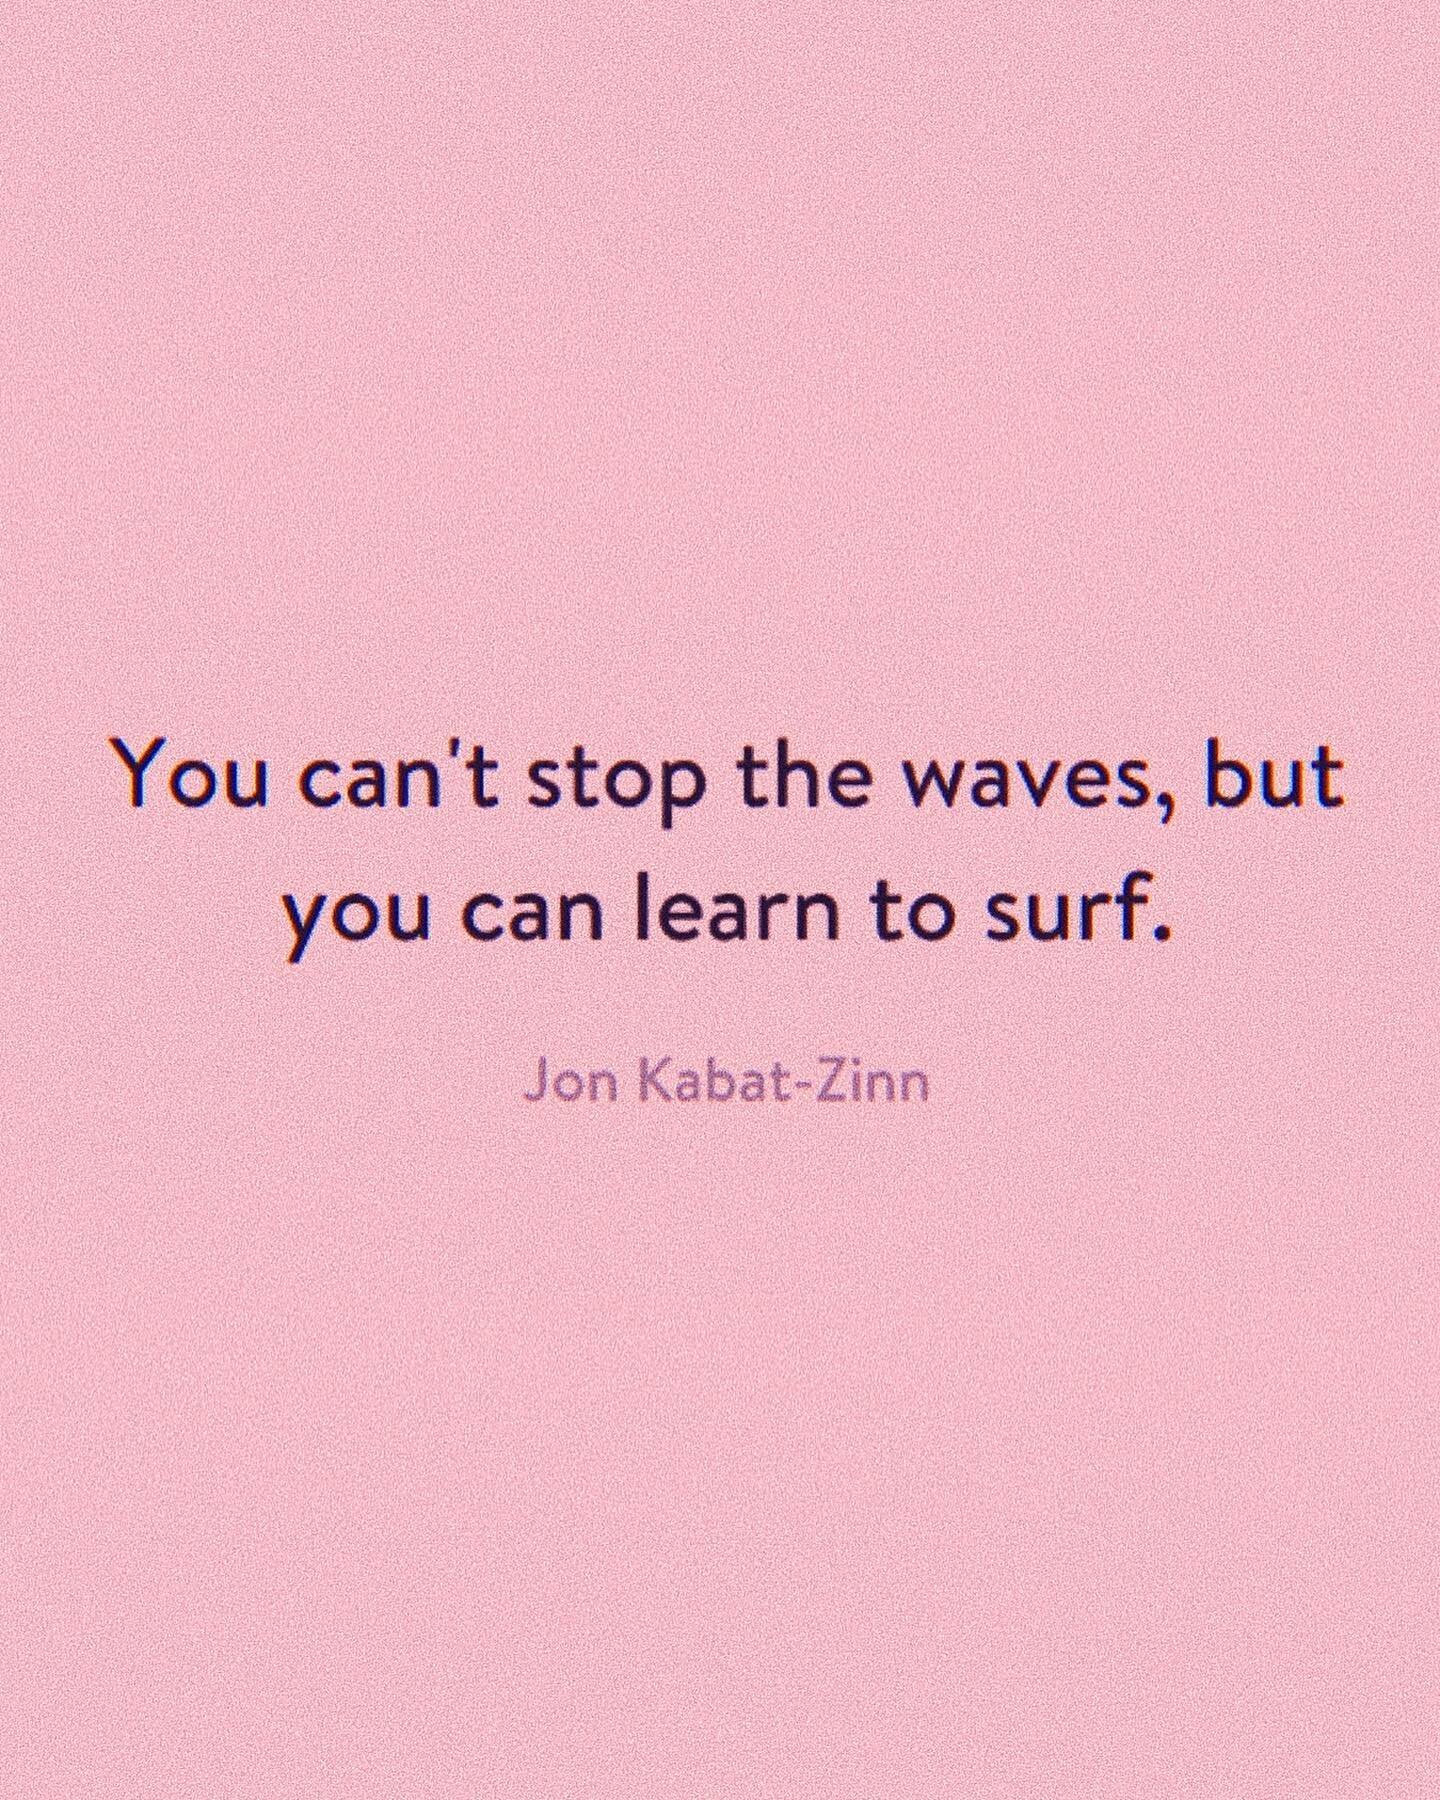 Take this quote however you will&hellip;.I hope it lands for you like it did me&hellip;.let&rsquo;s just say I started surfing (physically and metaphorically) and just like that, the waves are no longer bewildering rather something I seek daily to ch